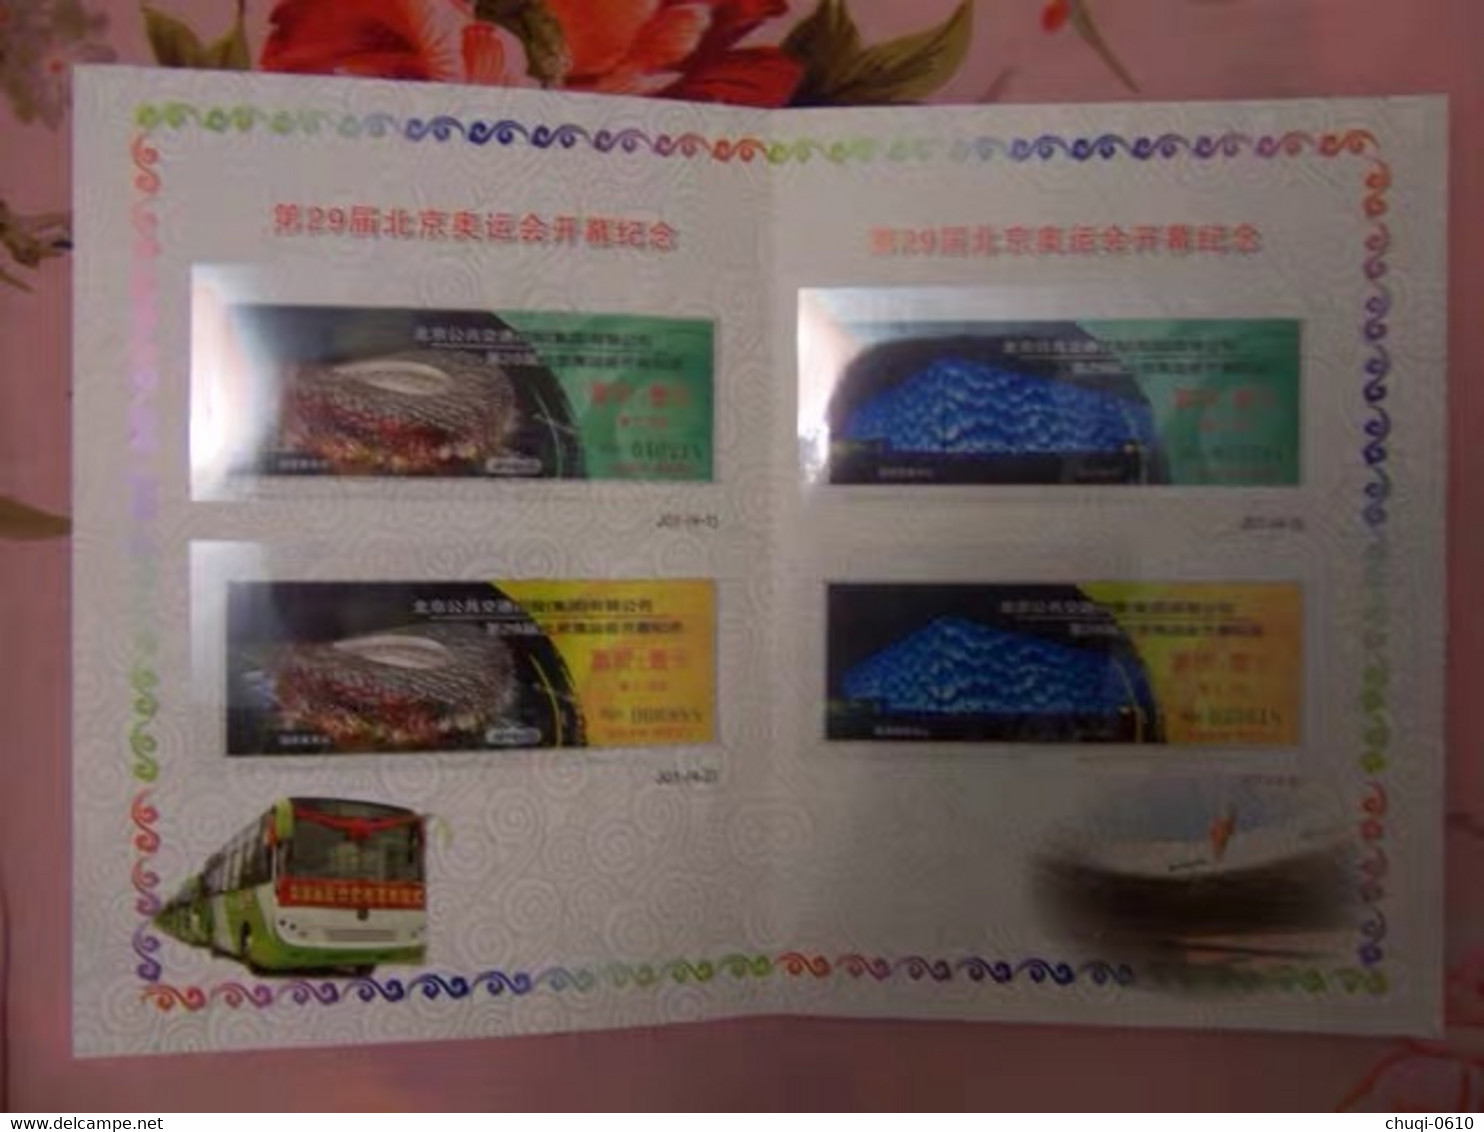 China Commemorative Bus Tickets For The 2008 Beijing Olympic Games，10 Pcs，​​​​​​​including Brochures - Monde